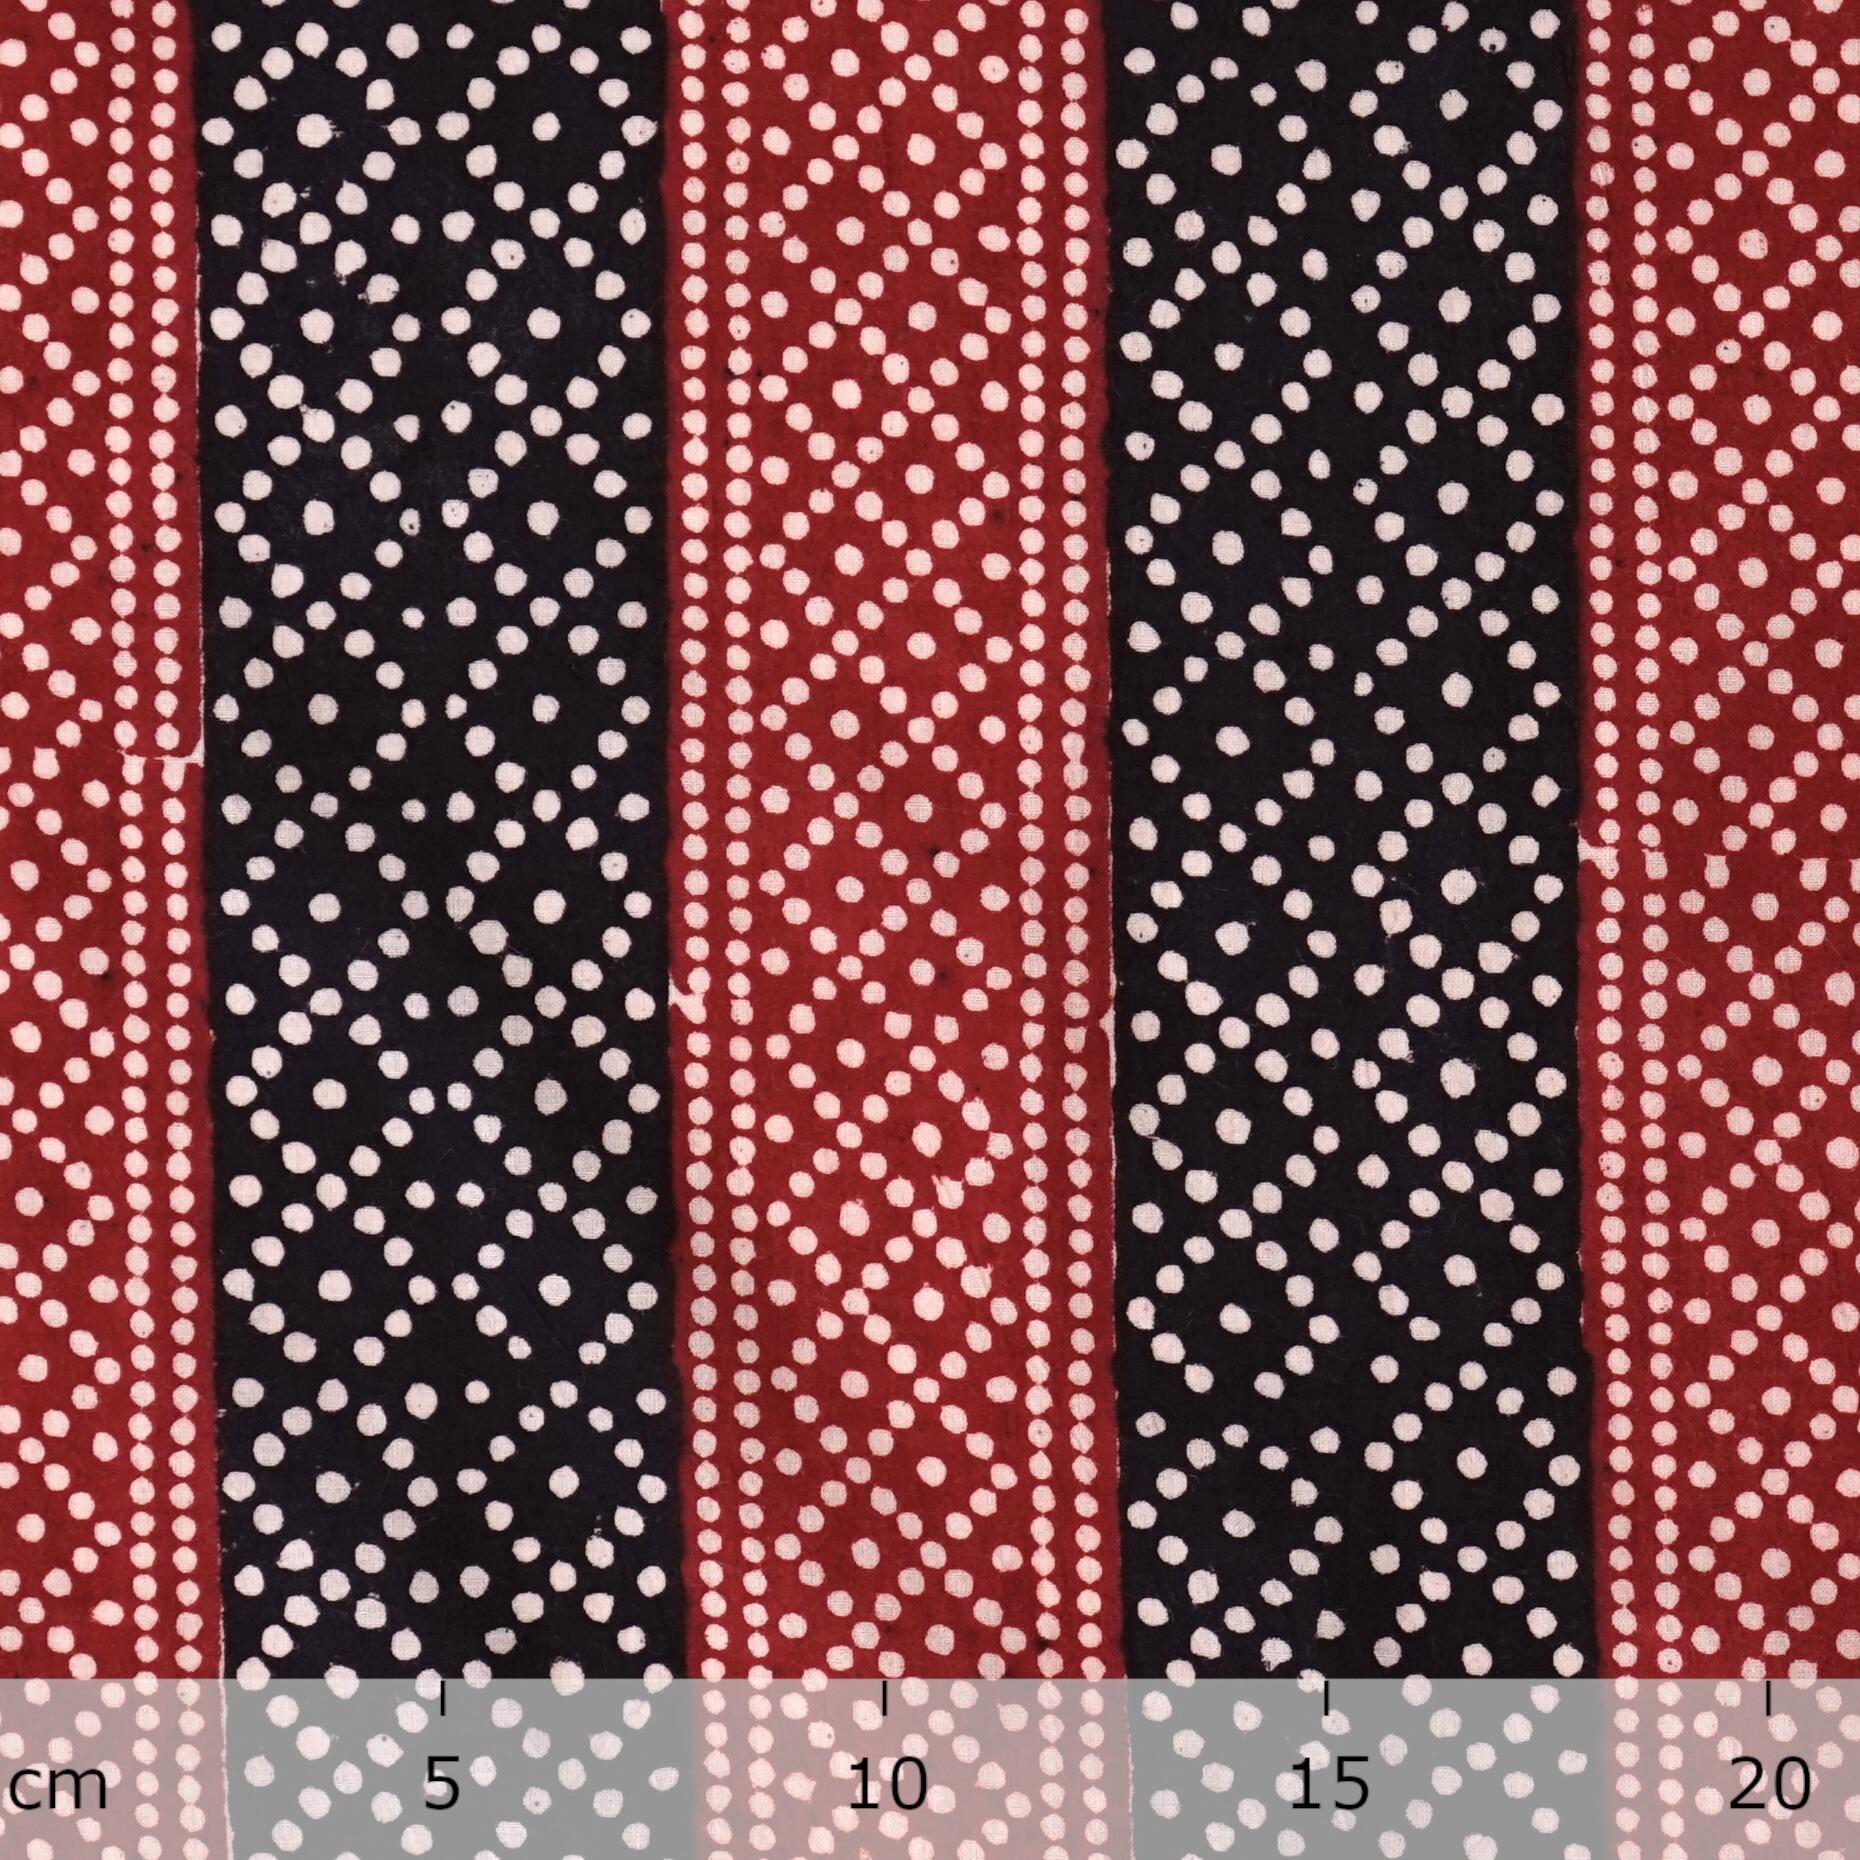 100% Block-Printed Cotton Fabric From India - Pixels Design - Iron Rust Black & Alizarin Red Dyes - Ruler